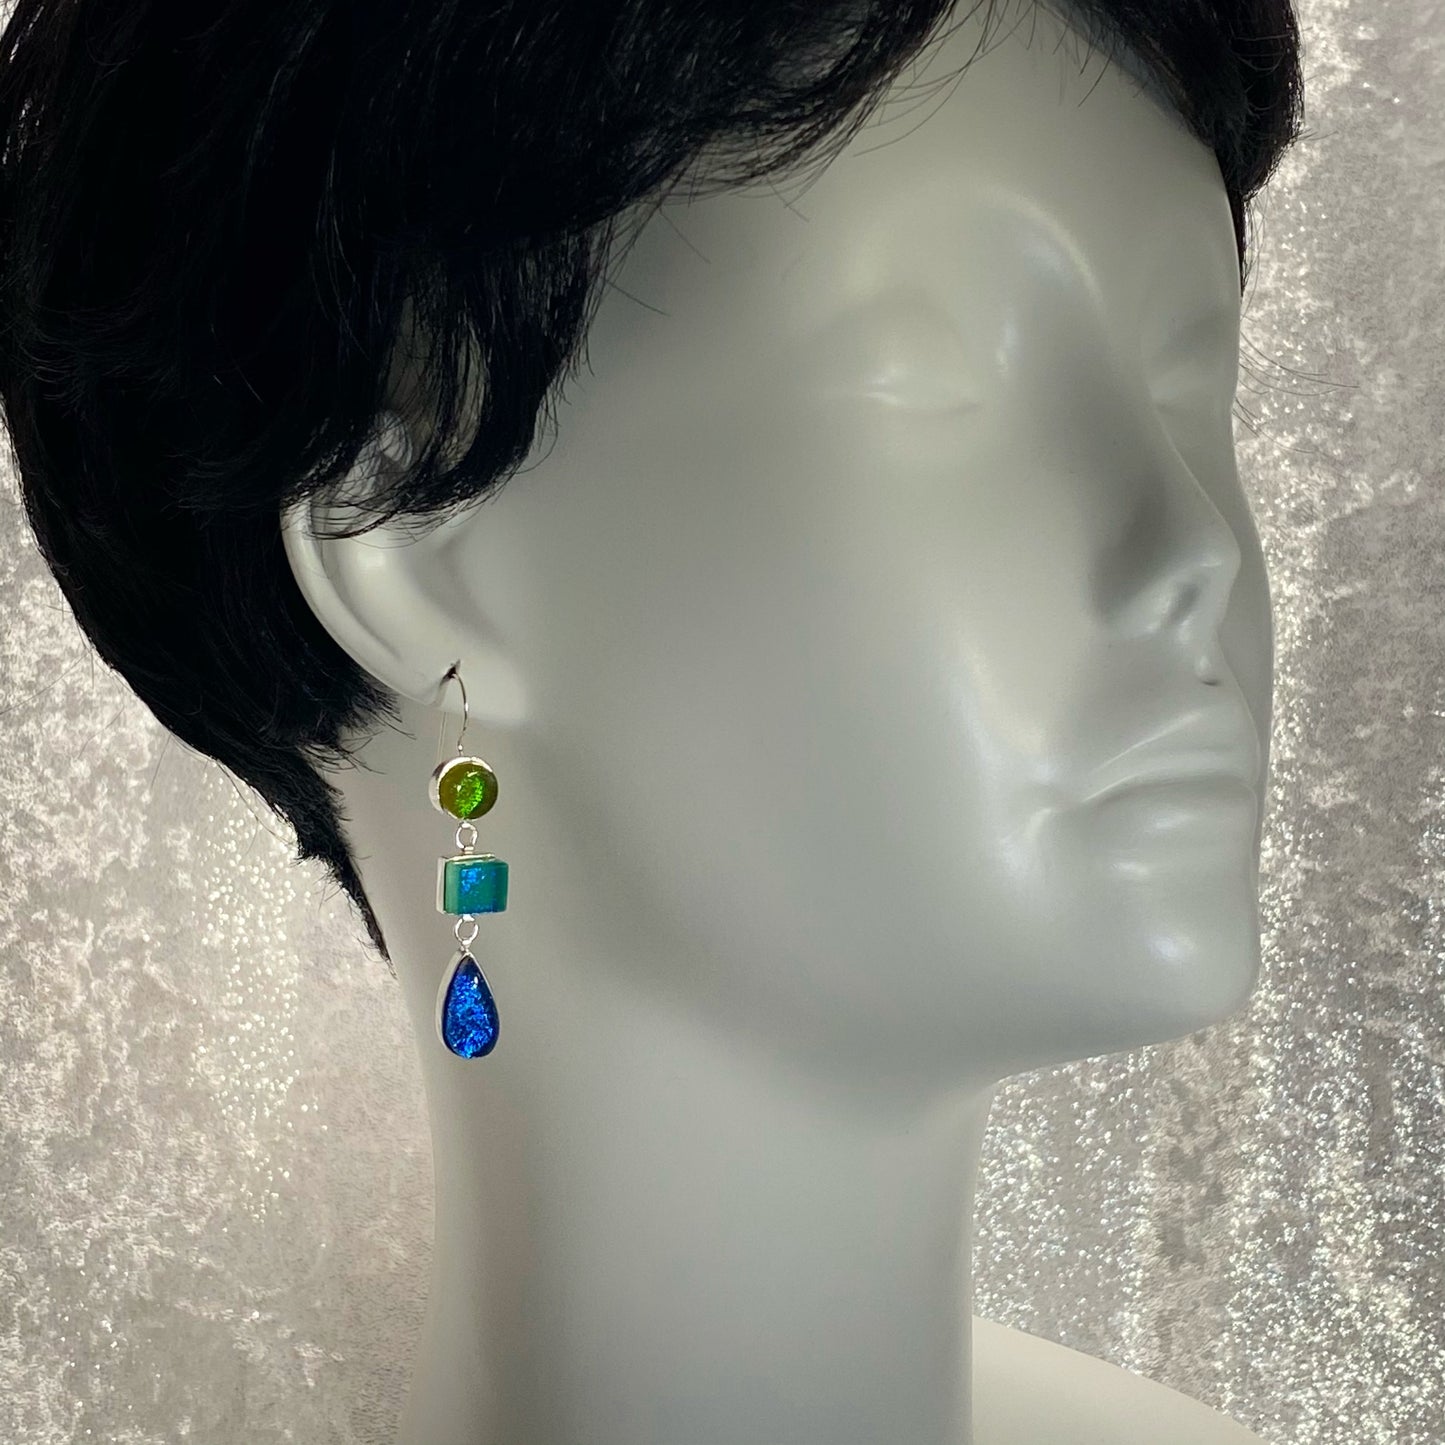 green blue, triple drop earrings, fused glass, glass jewelry, glass and silver jewelry, handmade, handcrafted, American Craft, hand fabricated jewelry, hand fabricated jewellery, Athen, Georgia, colorful jewelry, sparkle, bullseye glass, dichroic glass, art jewelry